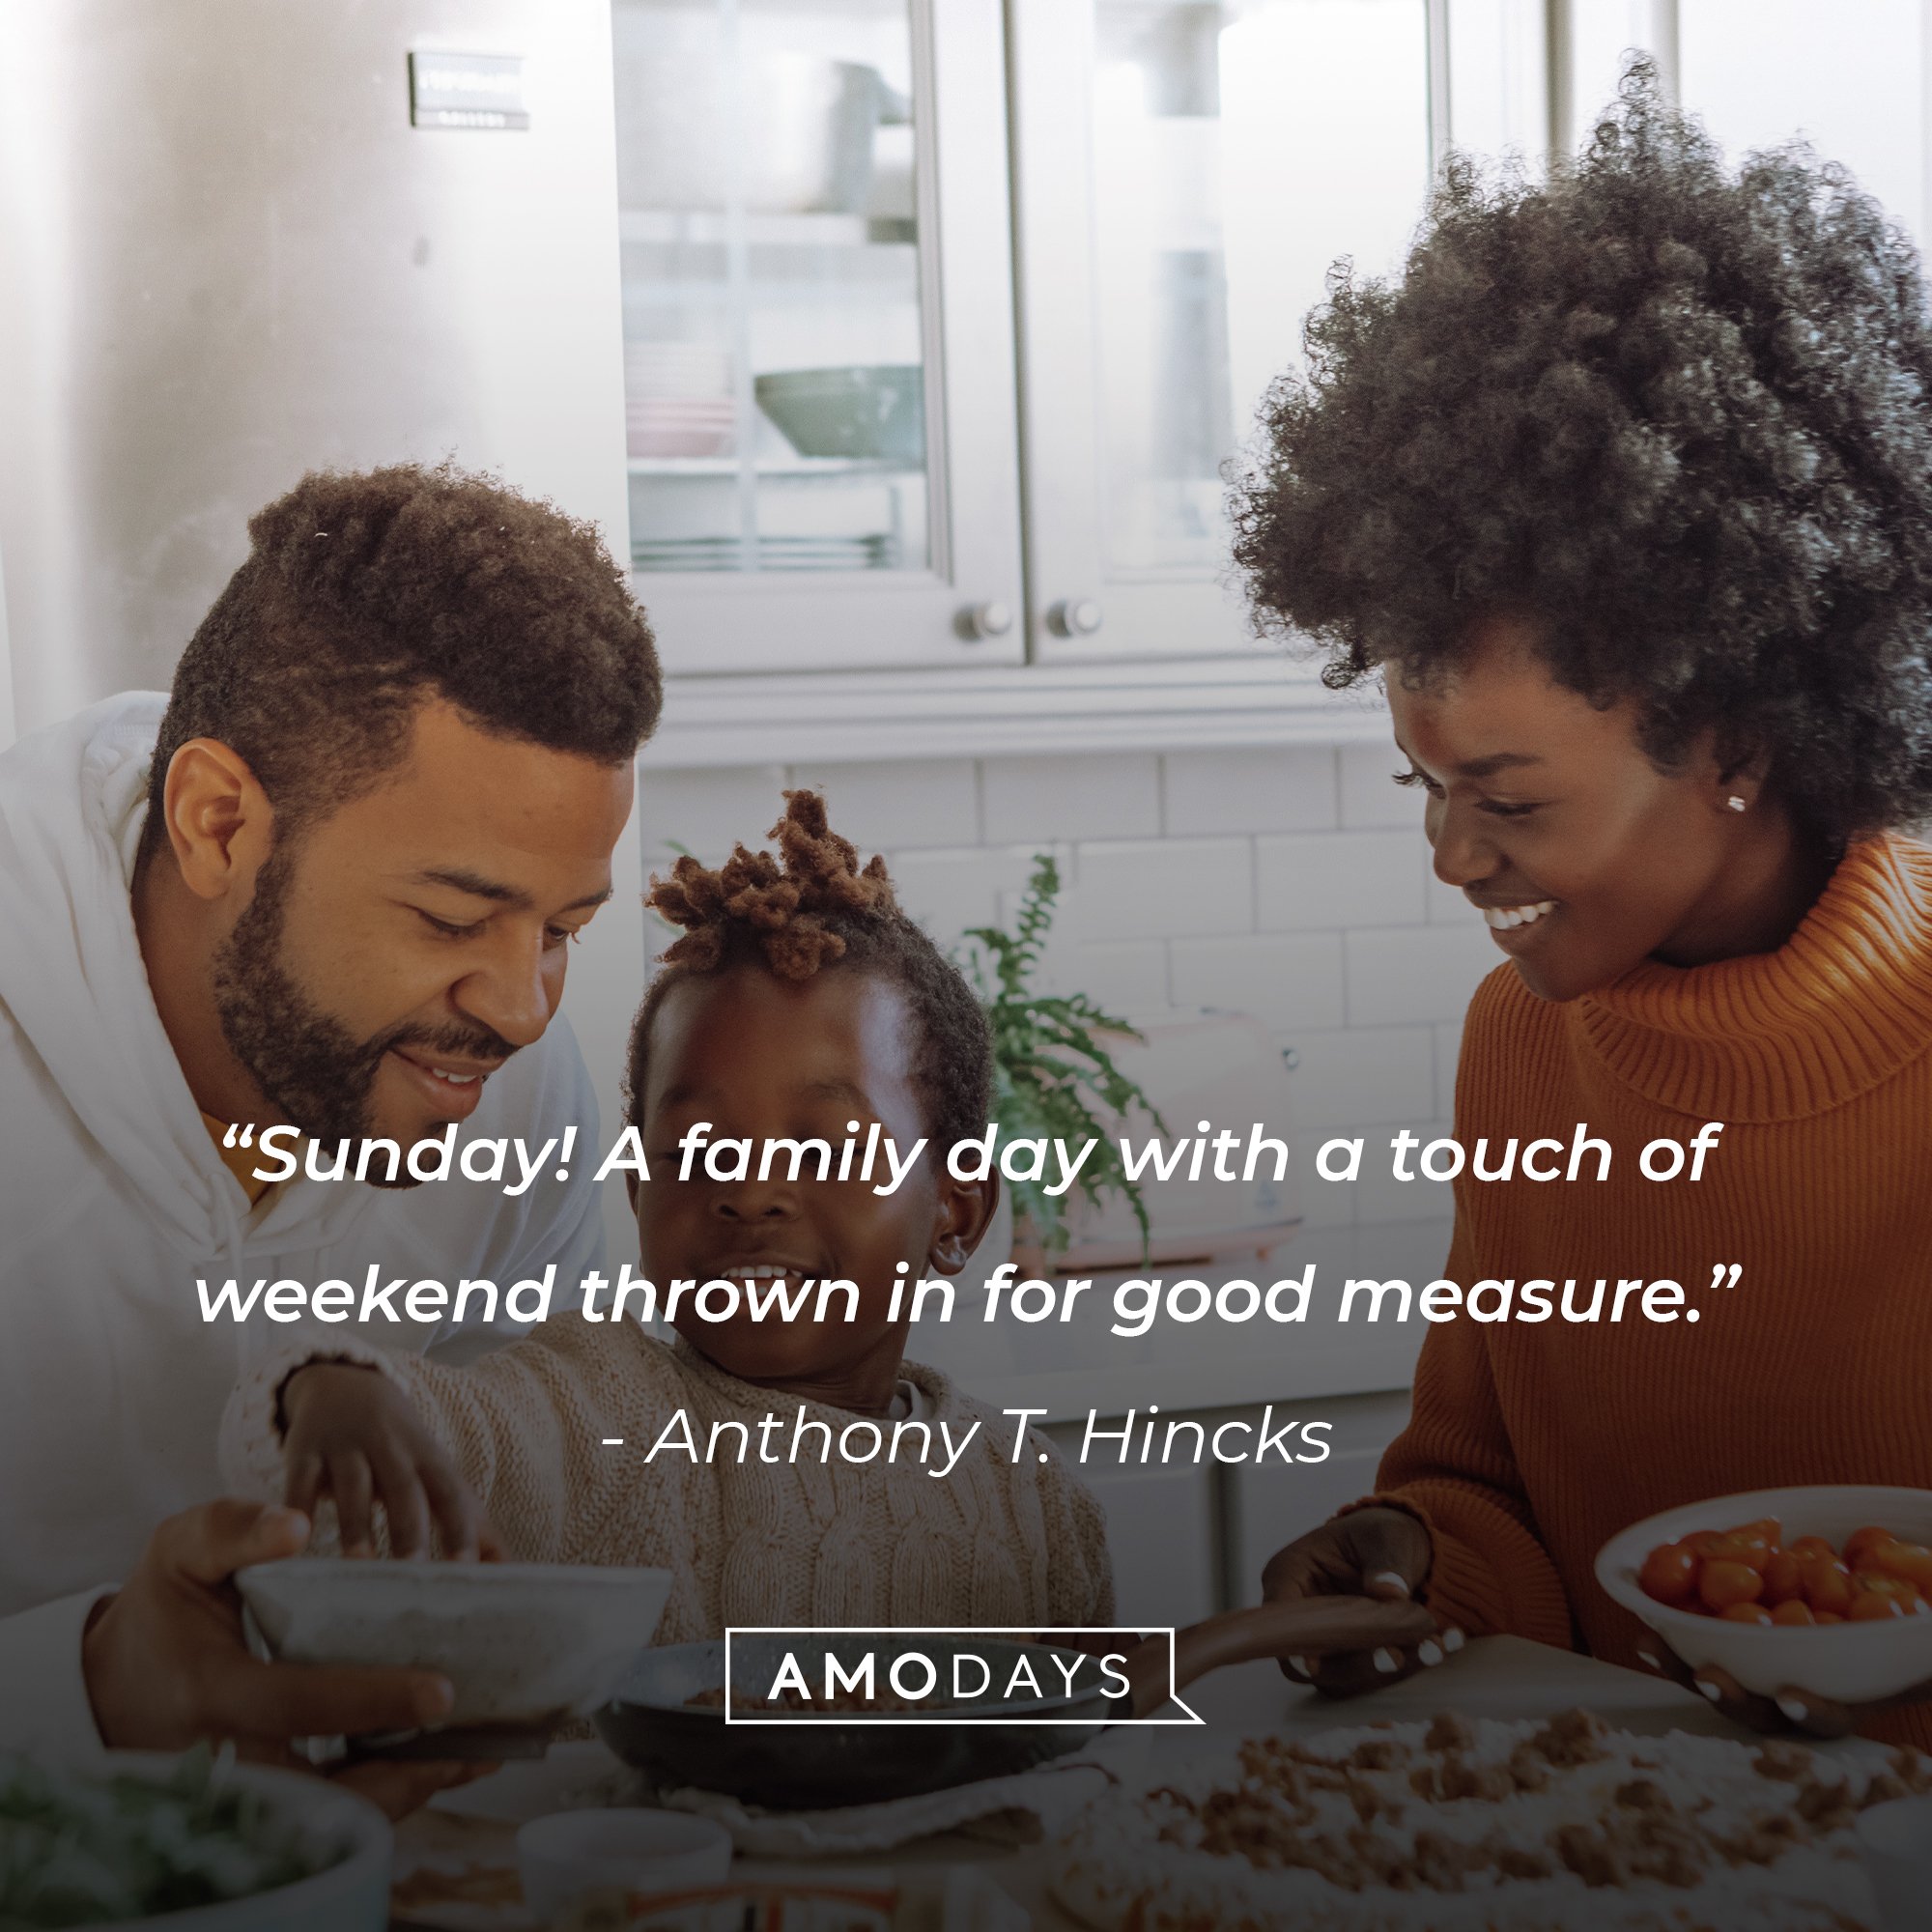 Anthony T. Hincks's quote: “Sunday! A family day with a touch of weekend thrown in for good measure.” | Image: AmoDays